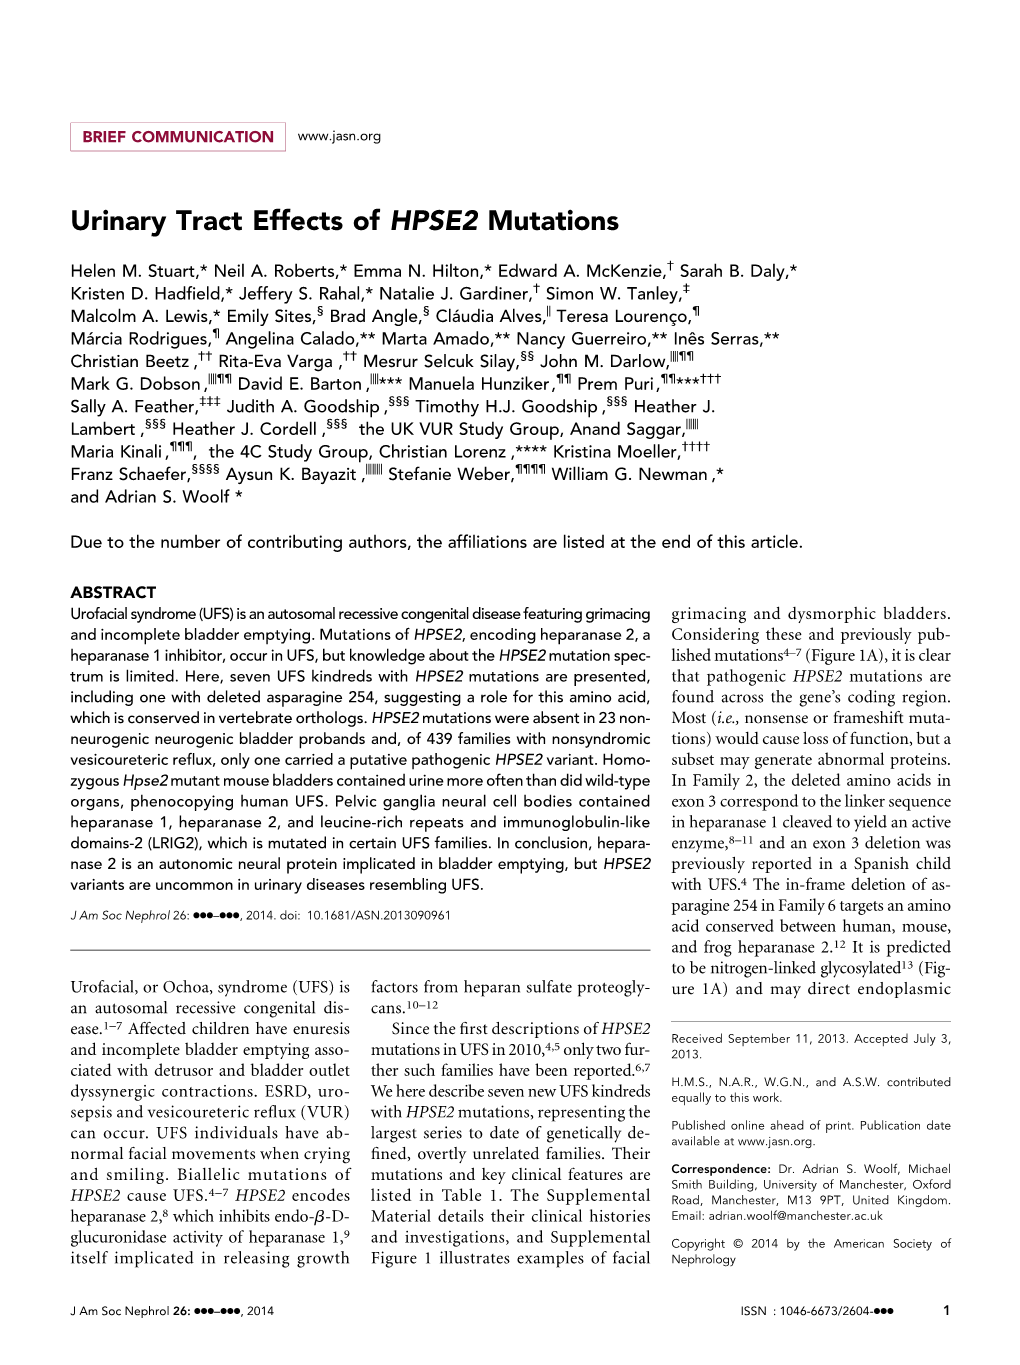 Urinary Tract Effects of HPSE2 Mutations